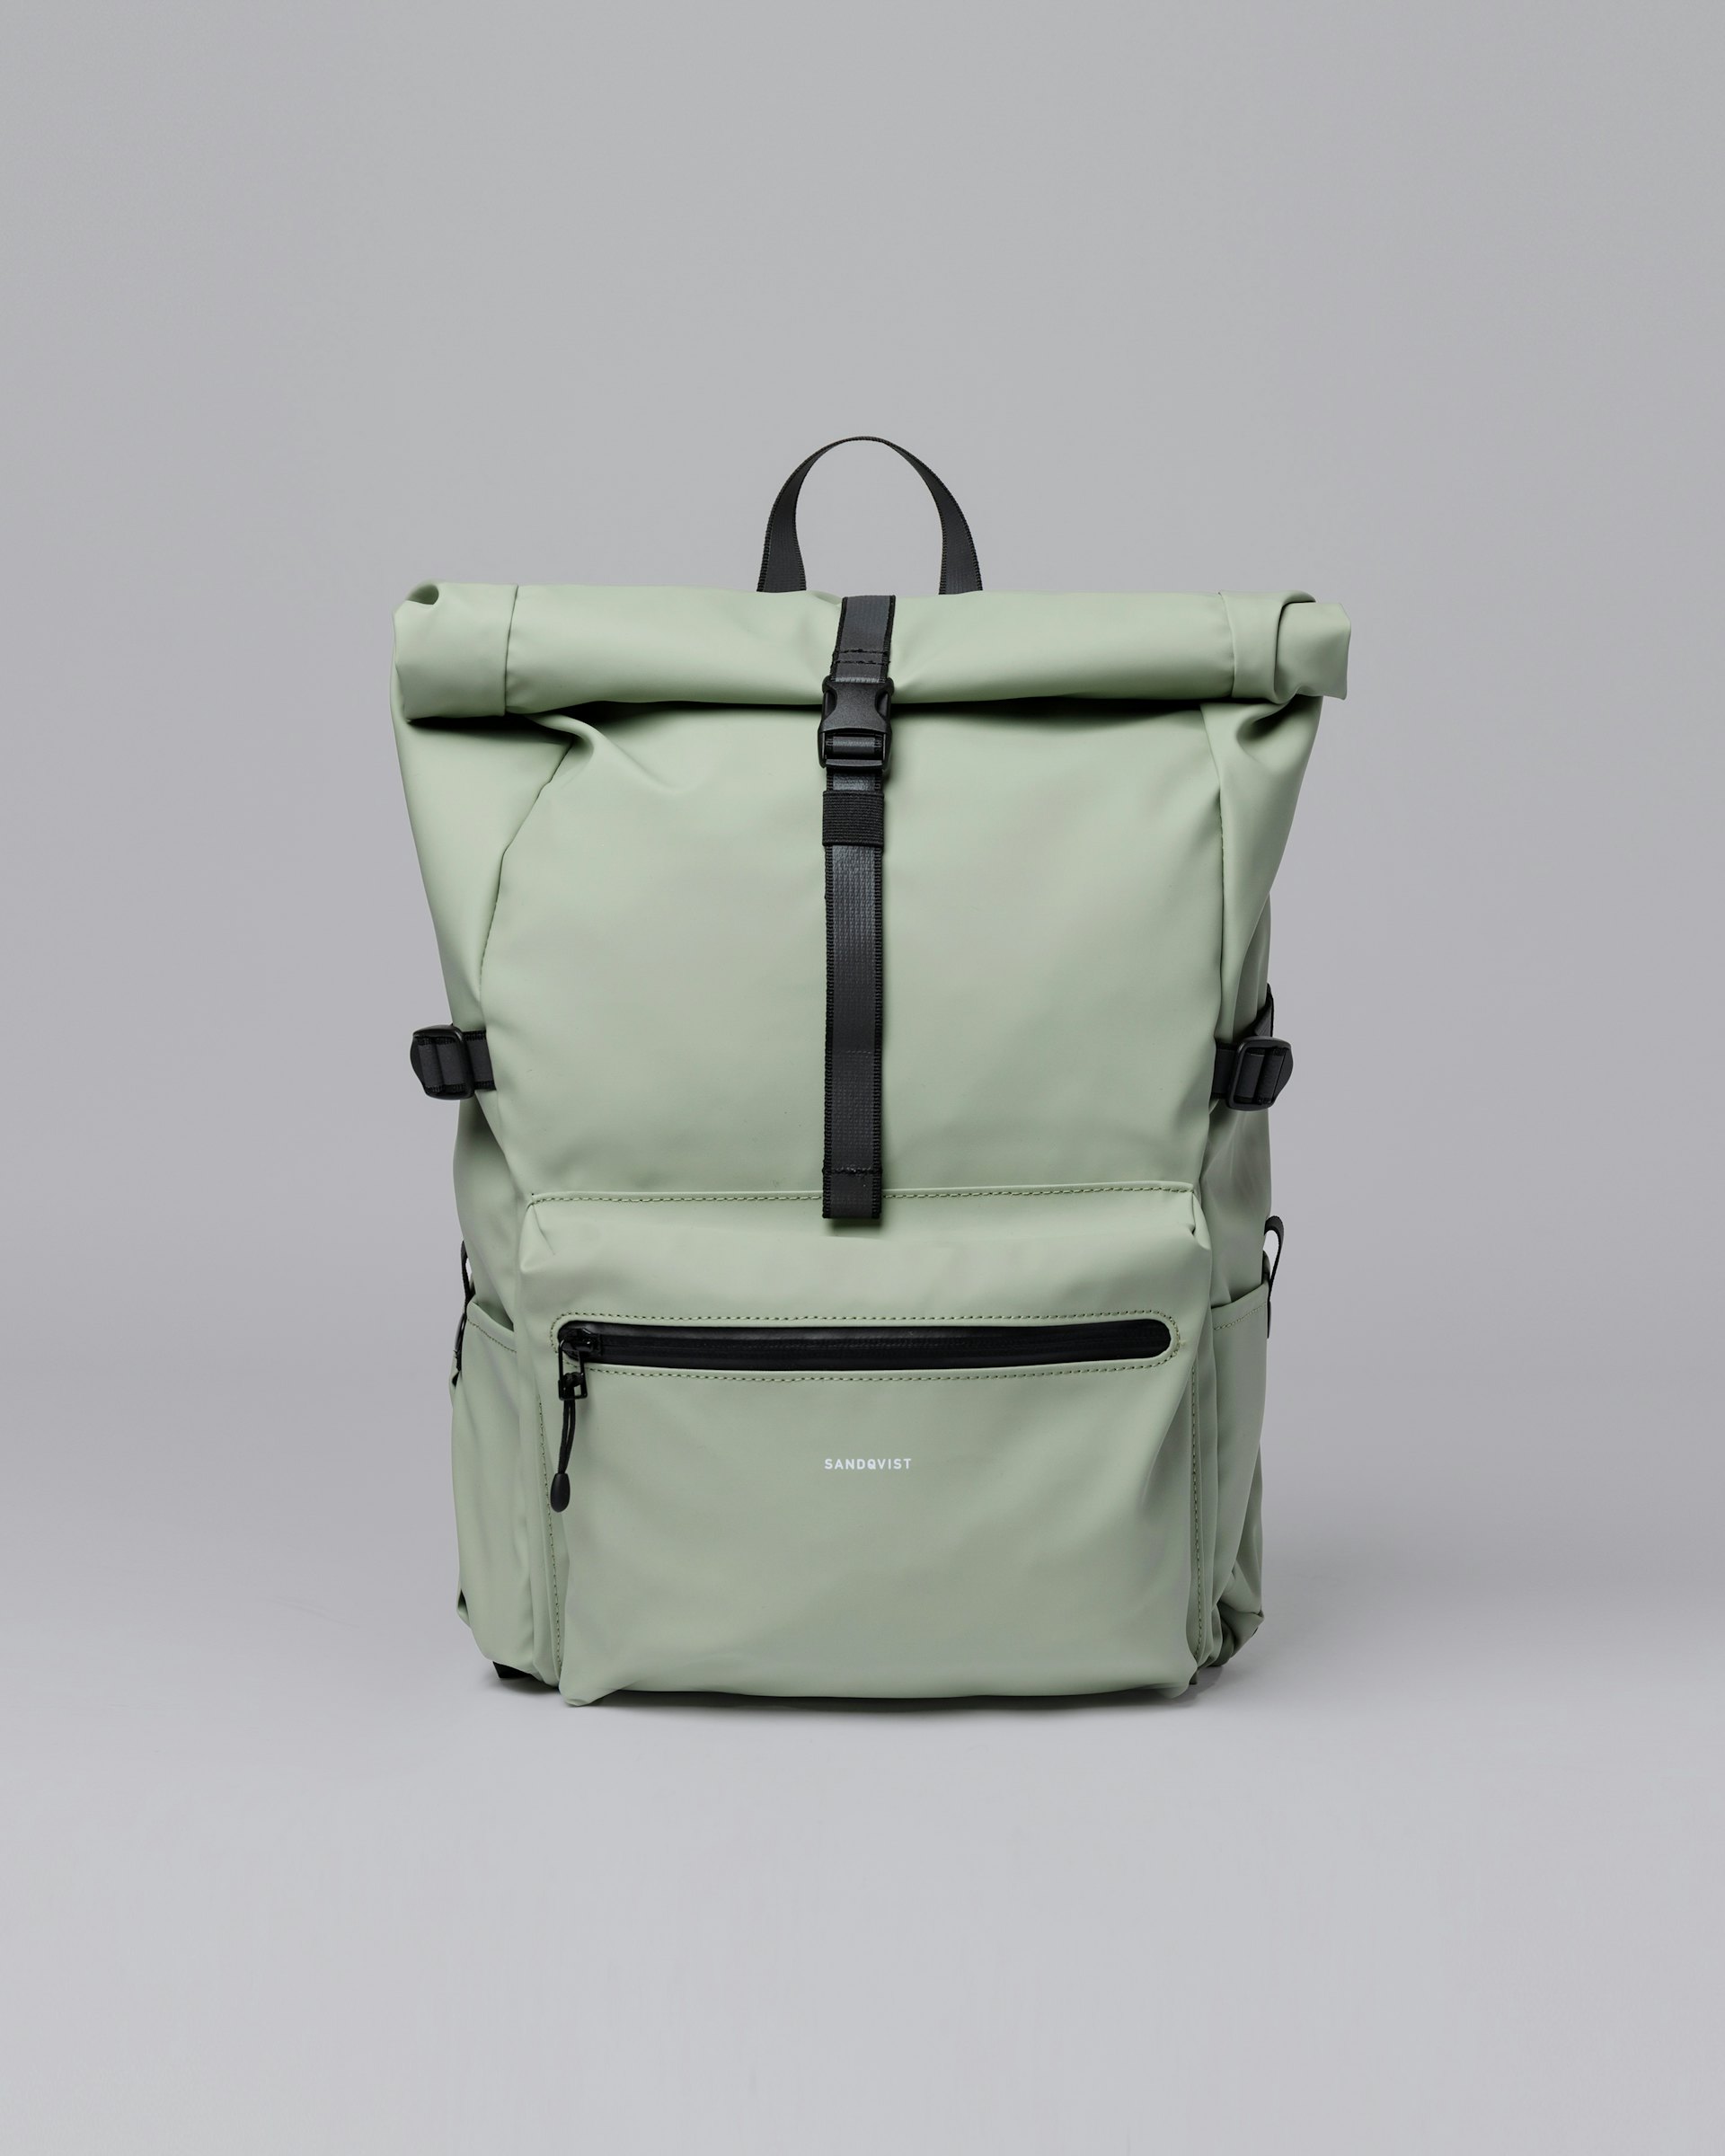 Ruben 2.0 belongs to the category Backpacks and is in color dew green (1 of 5)